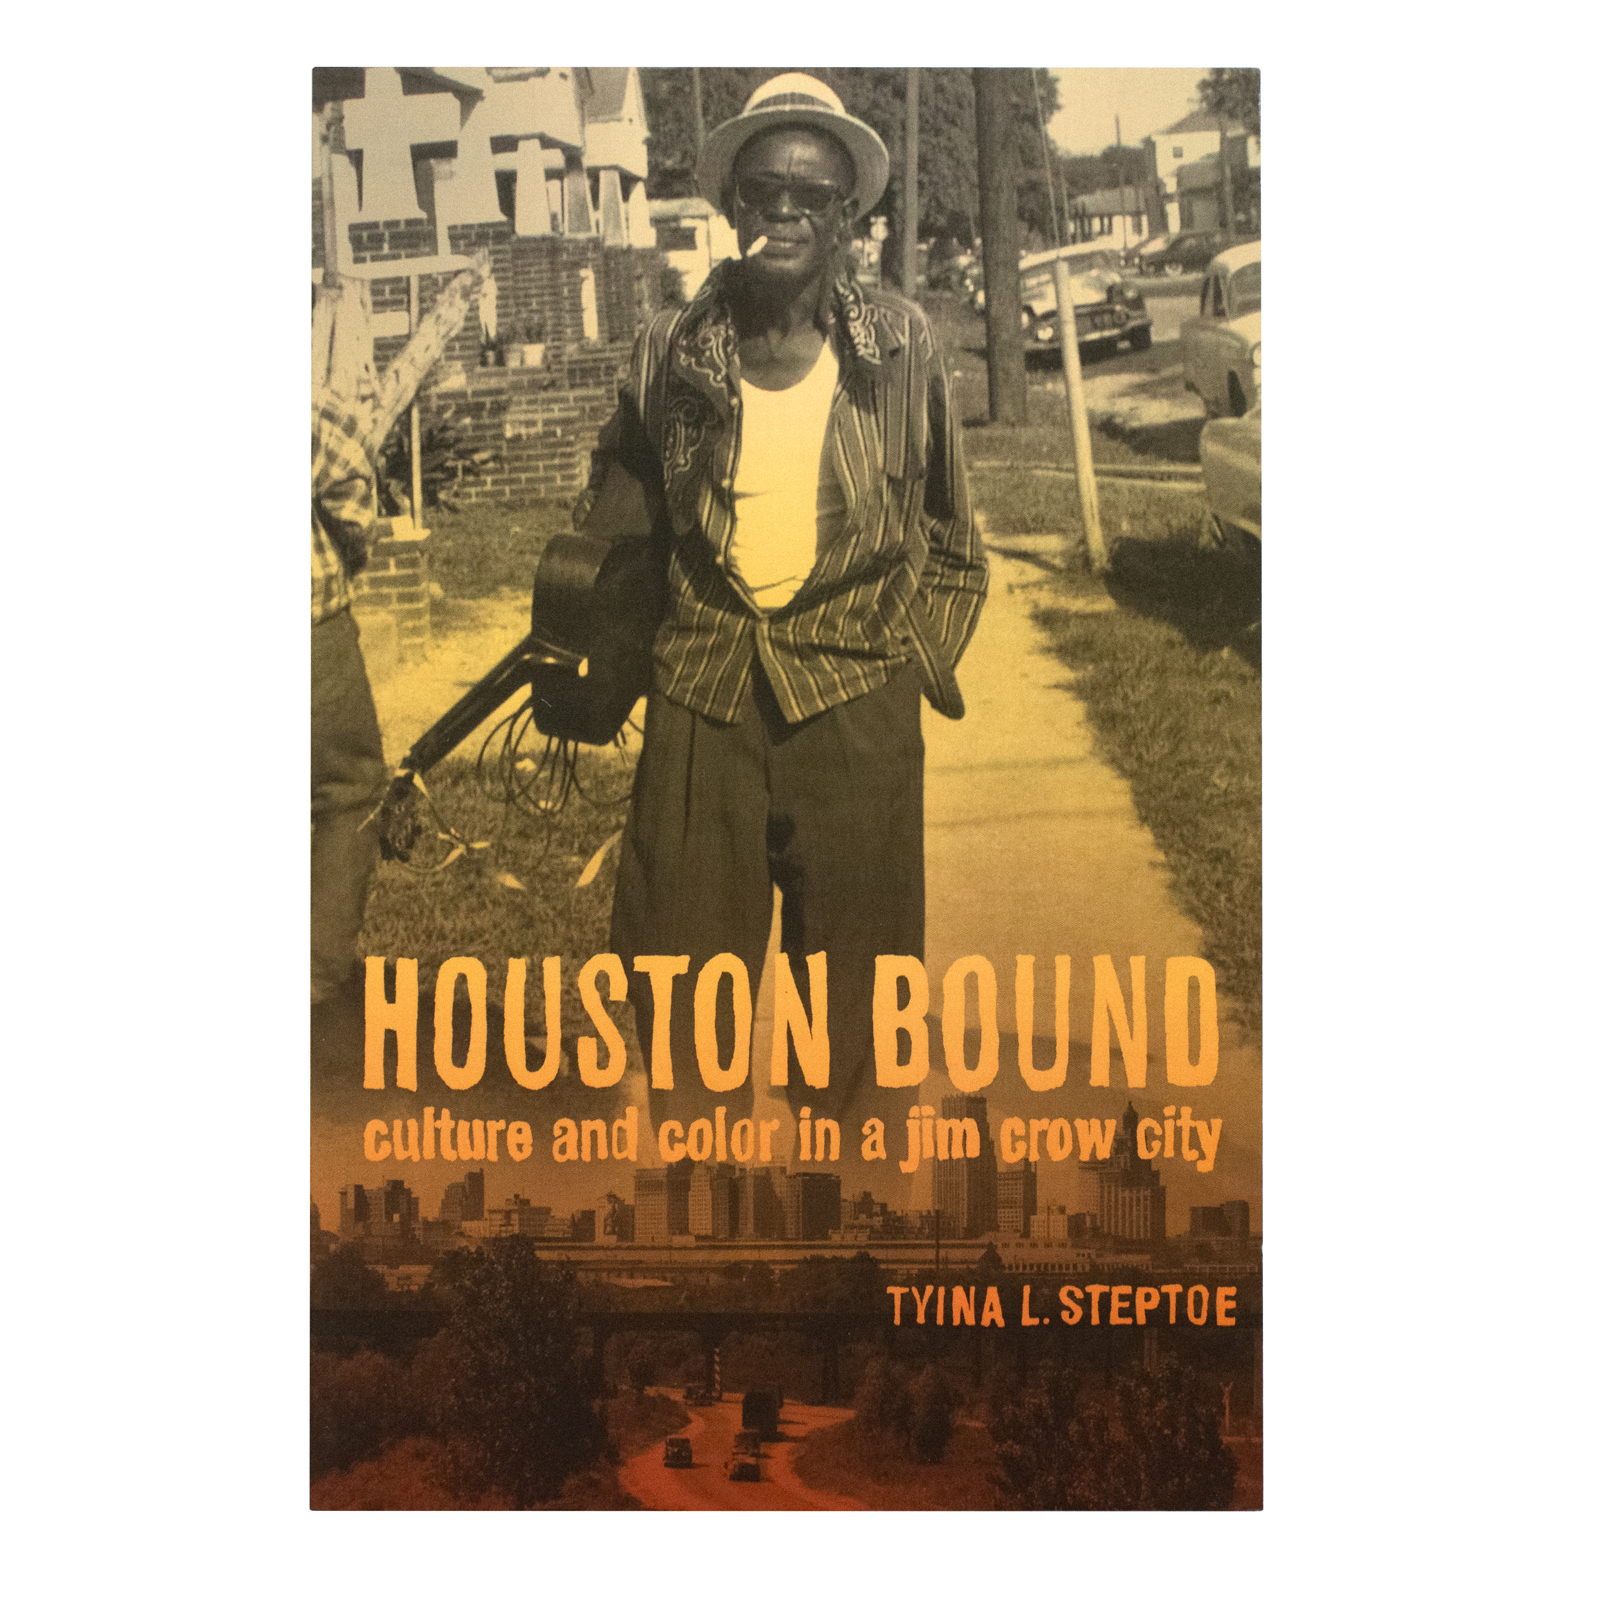 Houston Bound, Volume 41: Culture and Color in a Jim Crow City